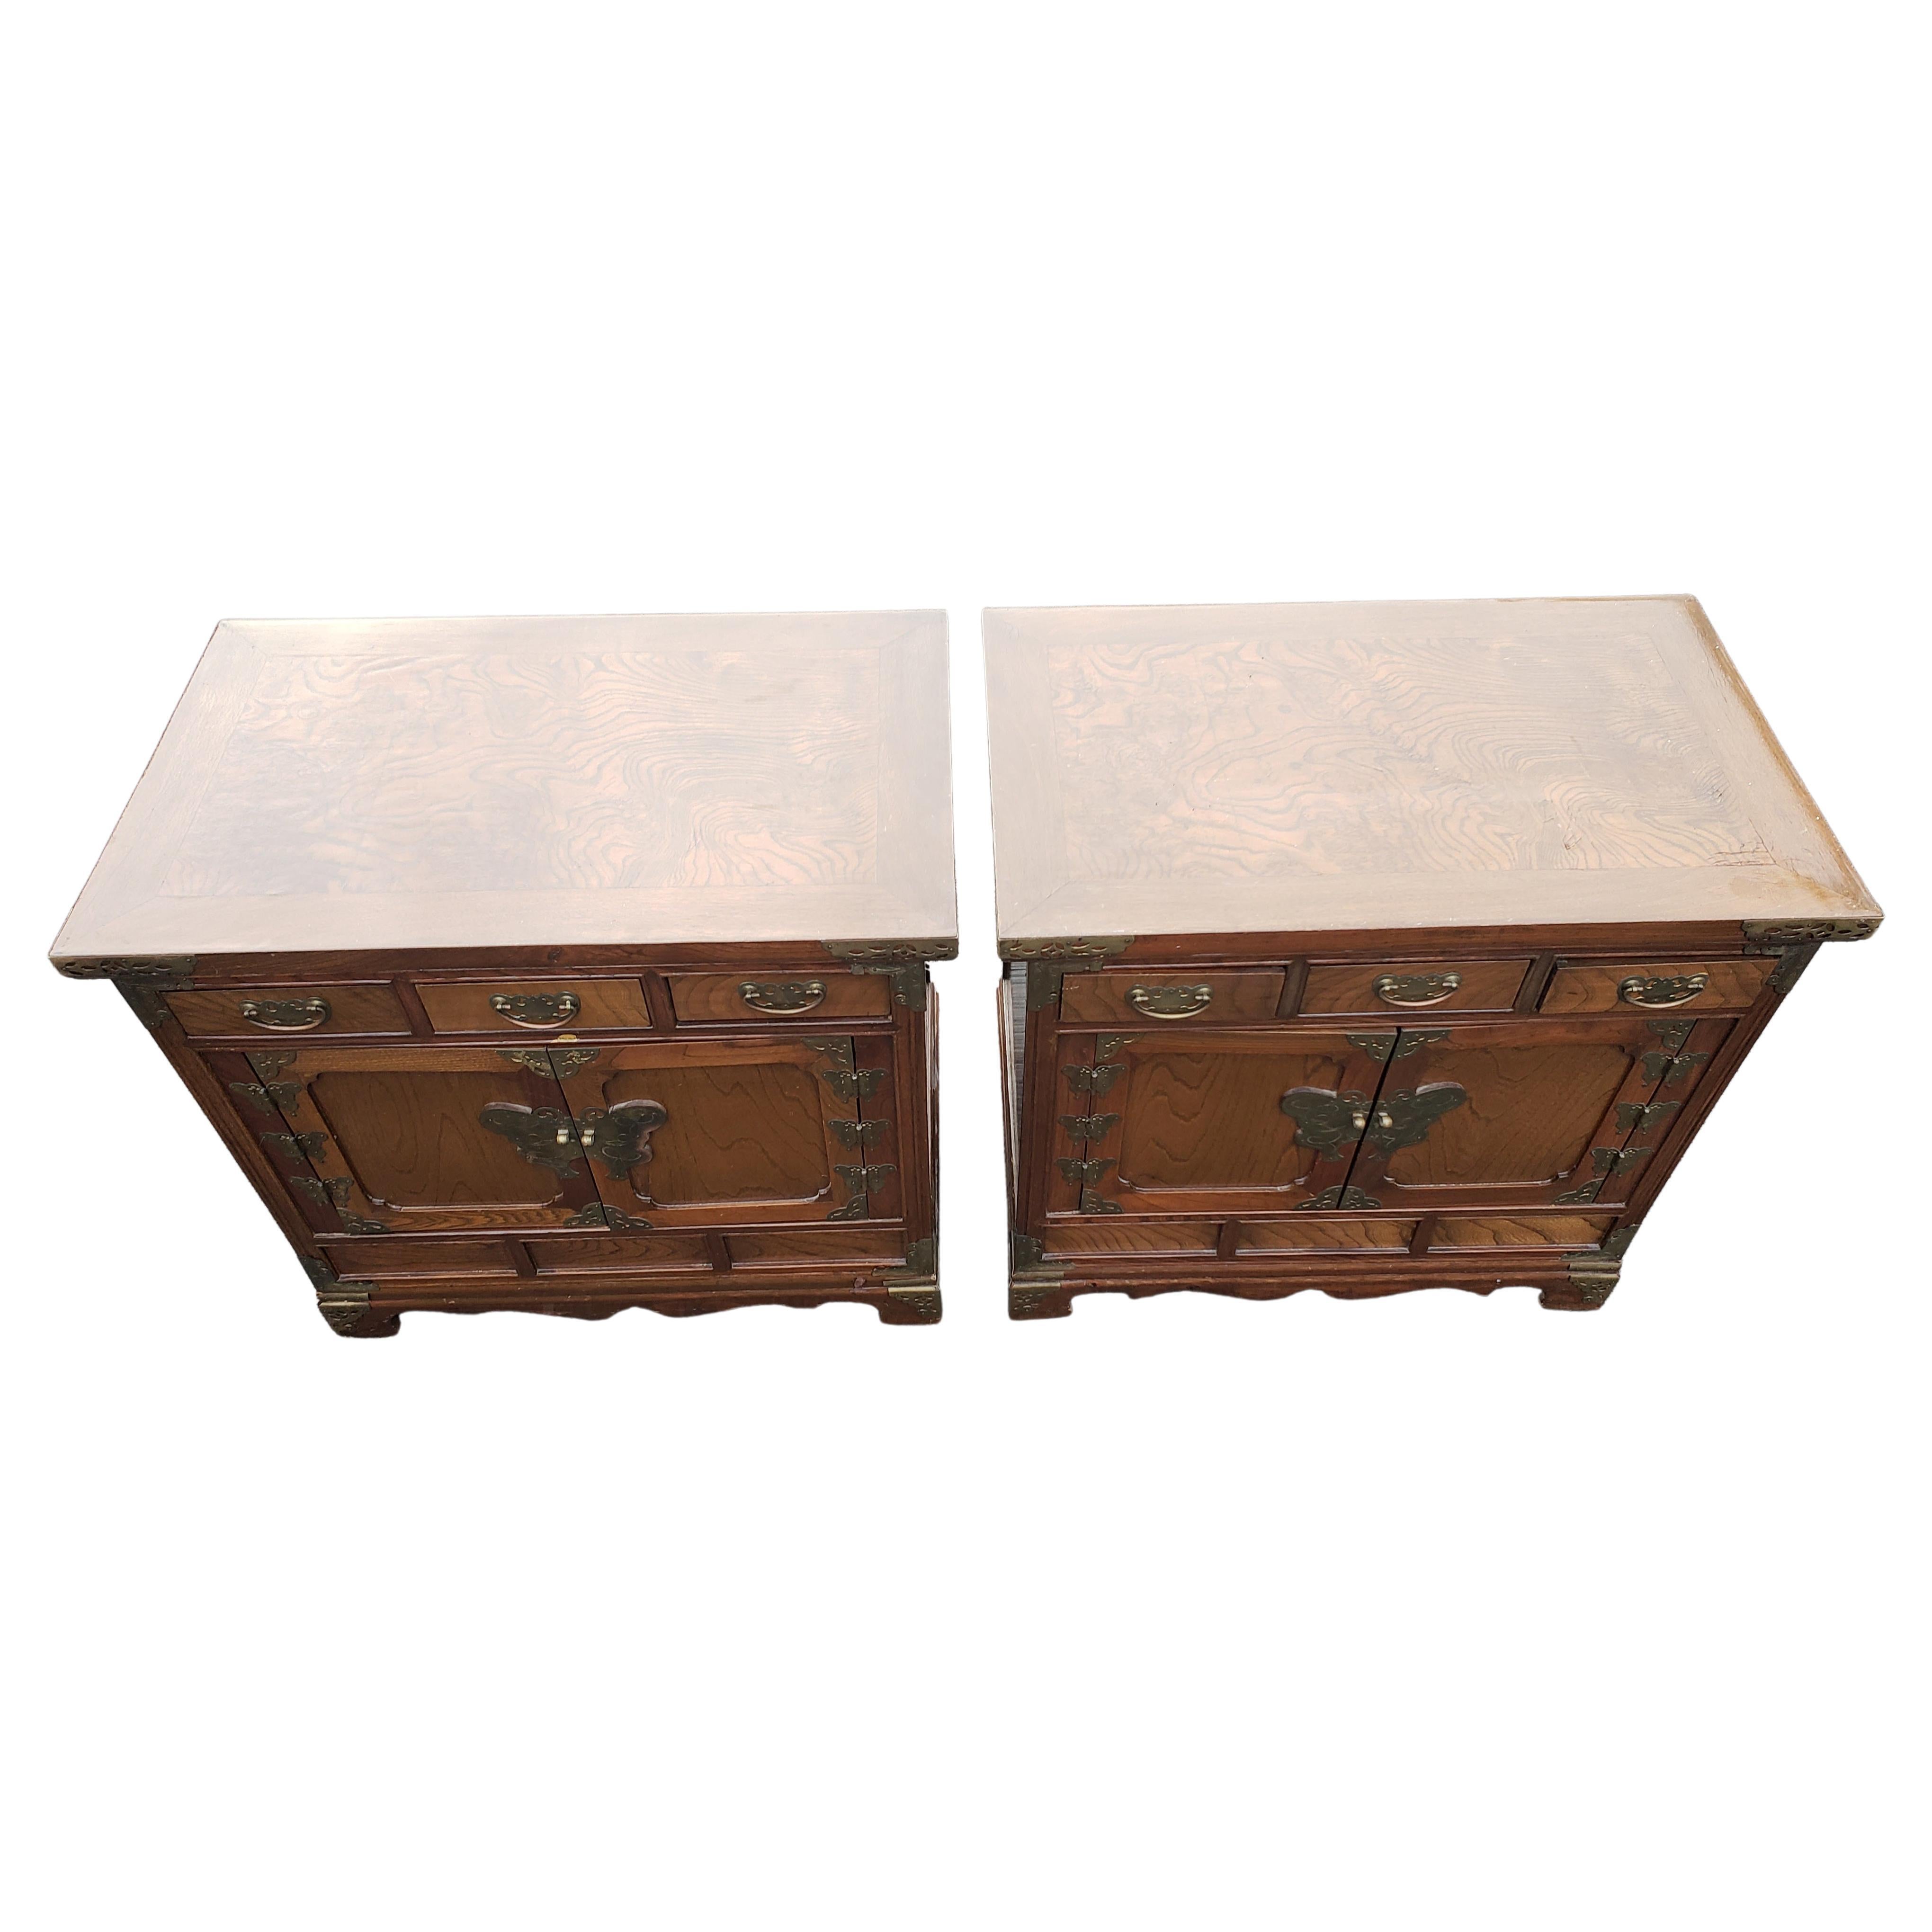 Anglo-Japanese Tansu Campaign Walnut Burl w/ Brass Fittings Nightstands Side Tables, C. 1930s